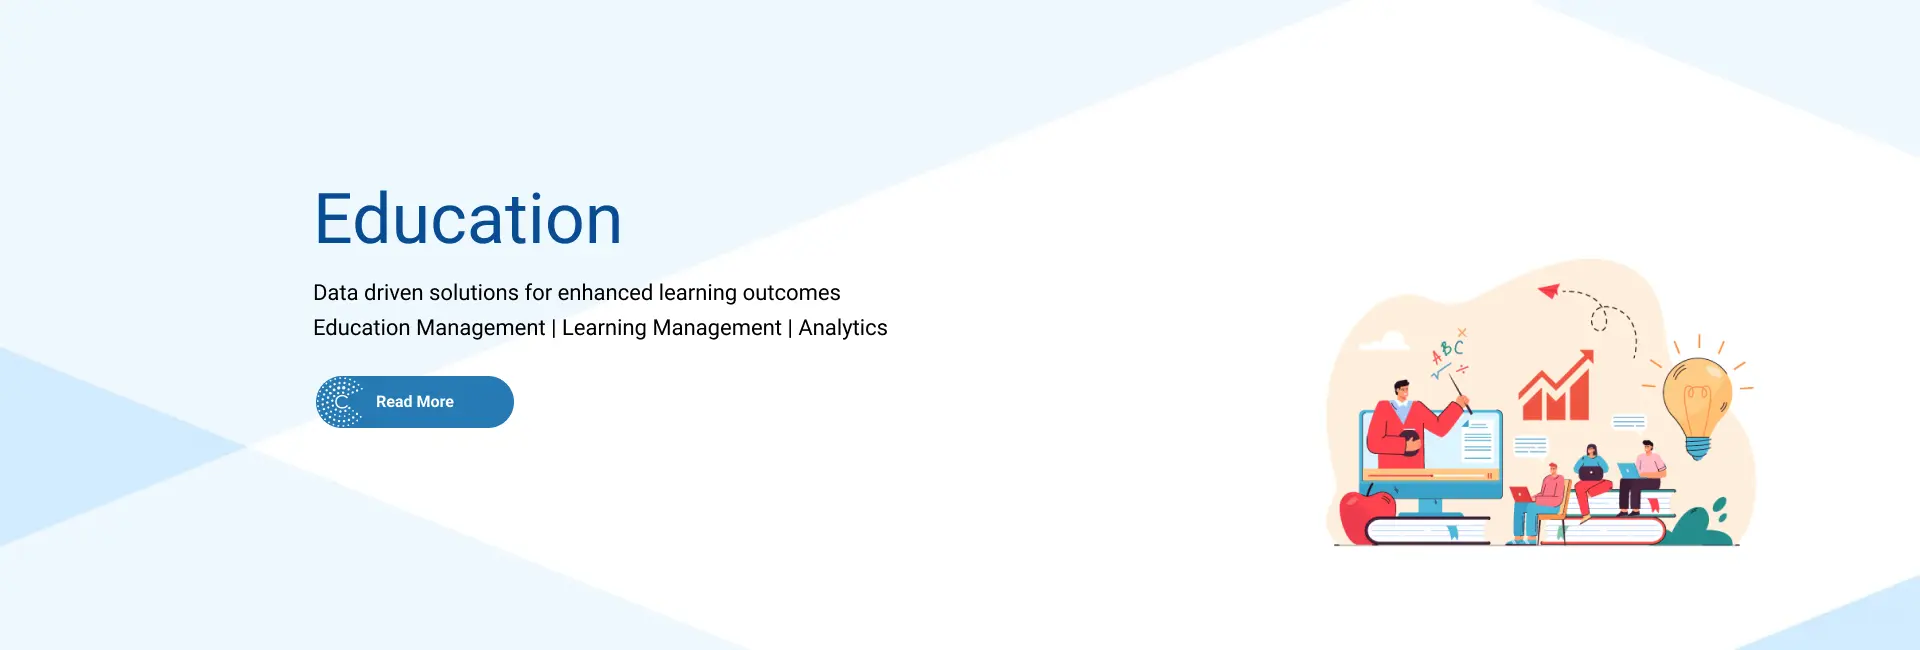 Education - Data driven solutions for enhanced learning outcomes | Education Management | Learning Management | Analytics